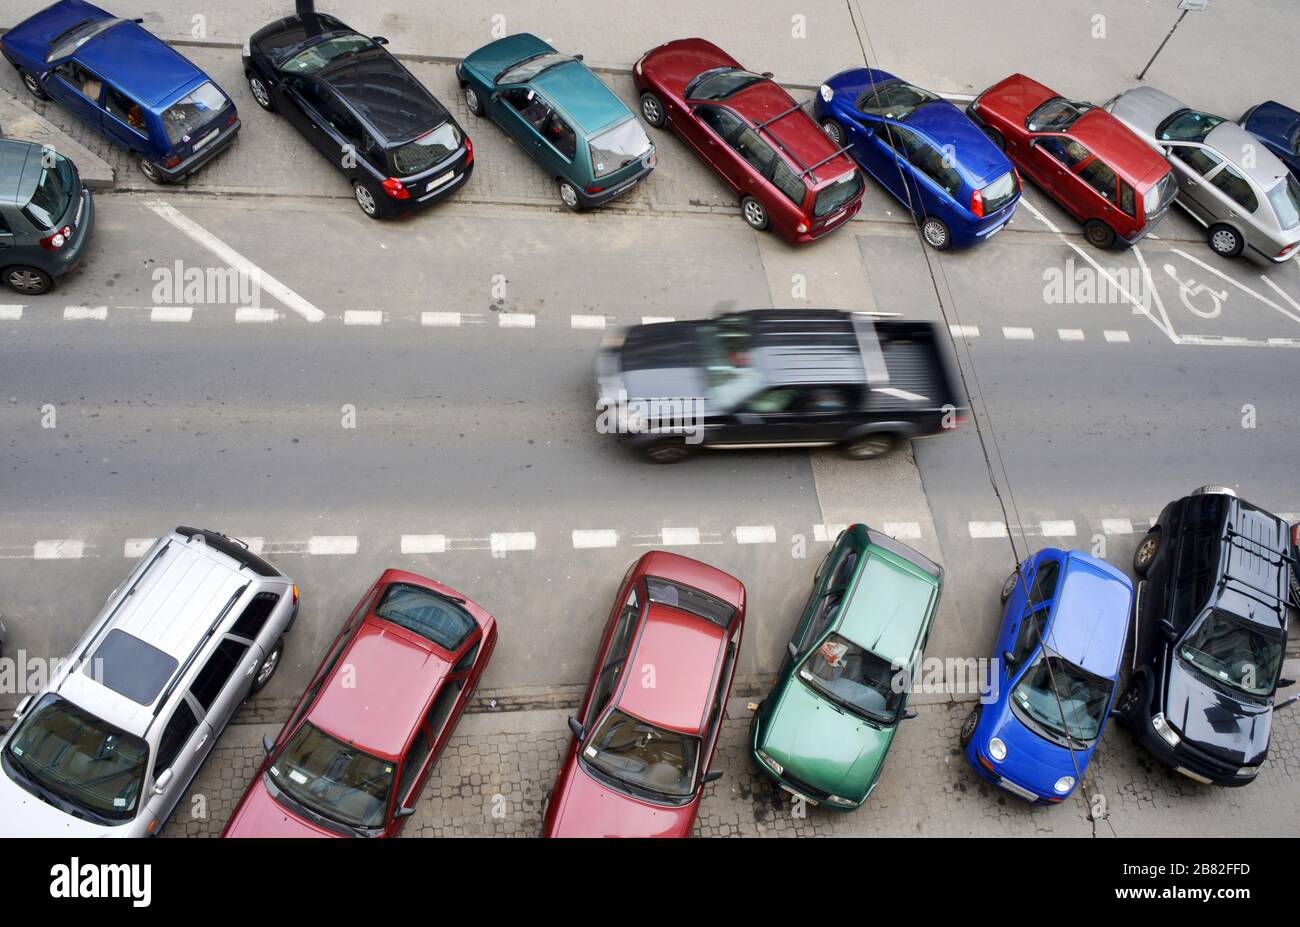 Warsaw, Poland 04-17-2013 aerial with parked car in lots and traffic Stock Photo